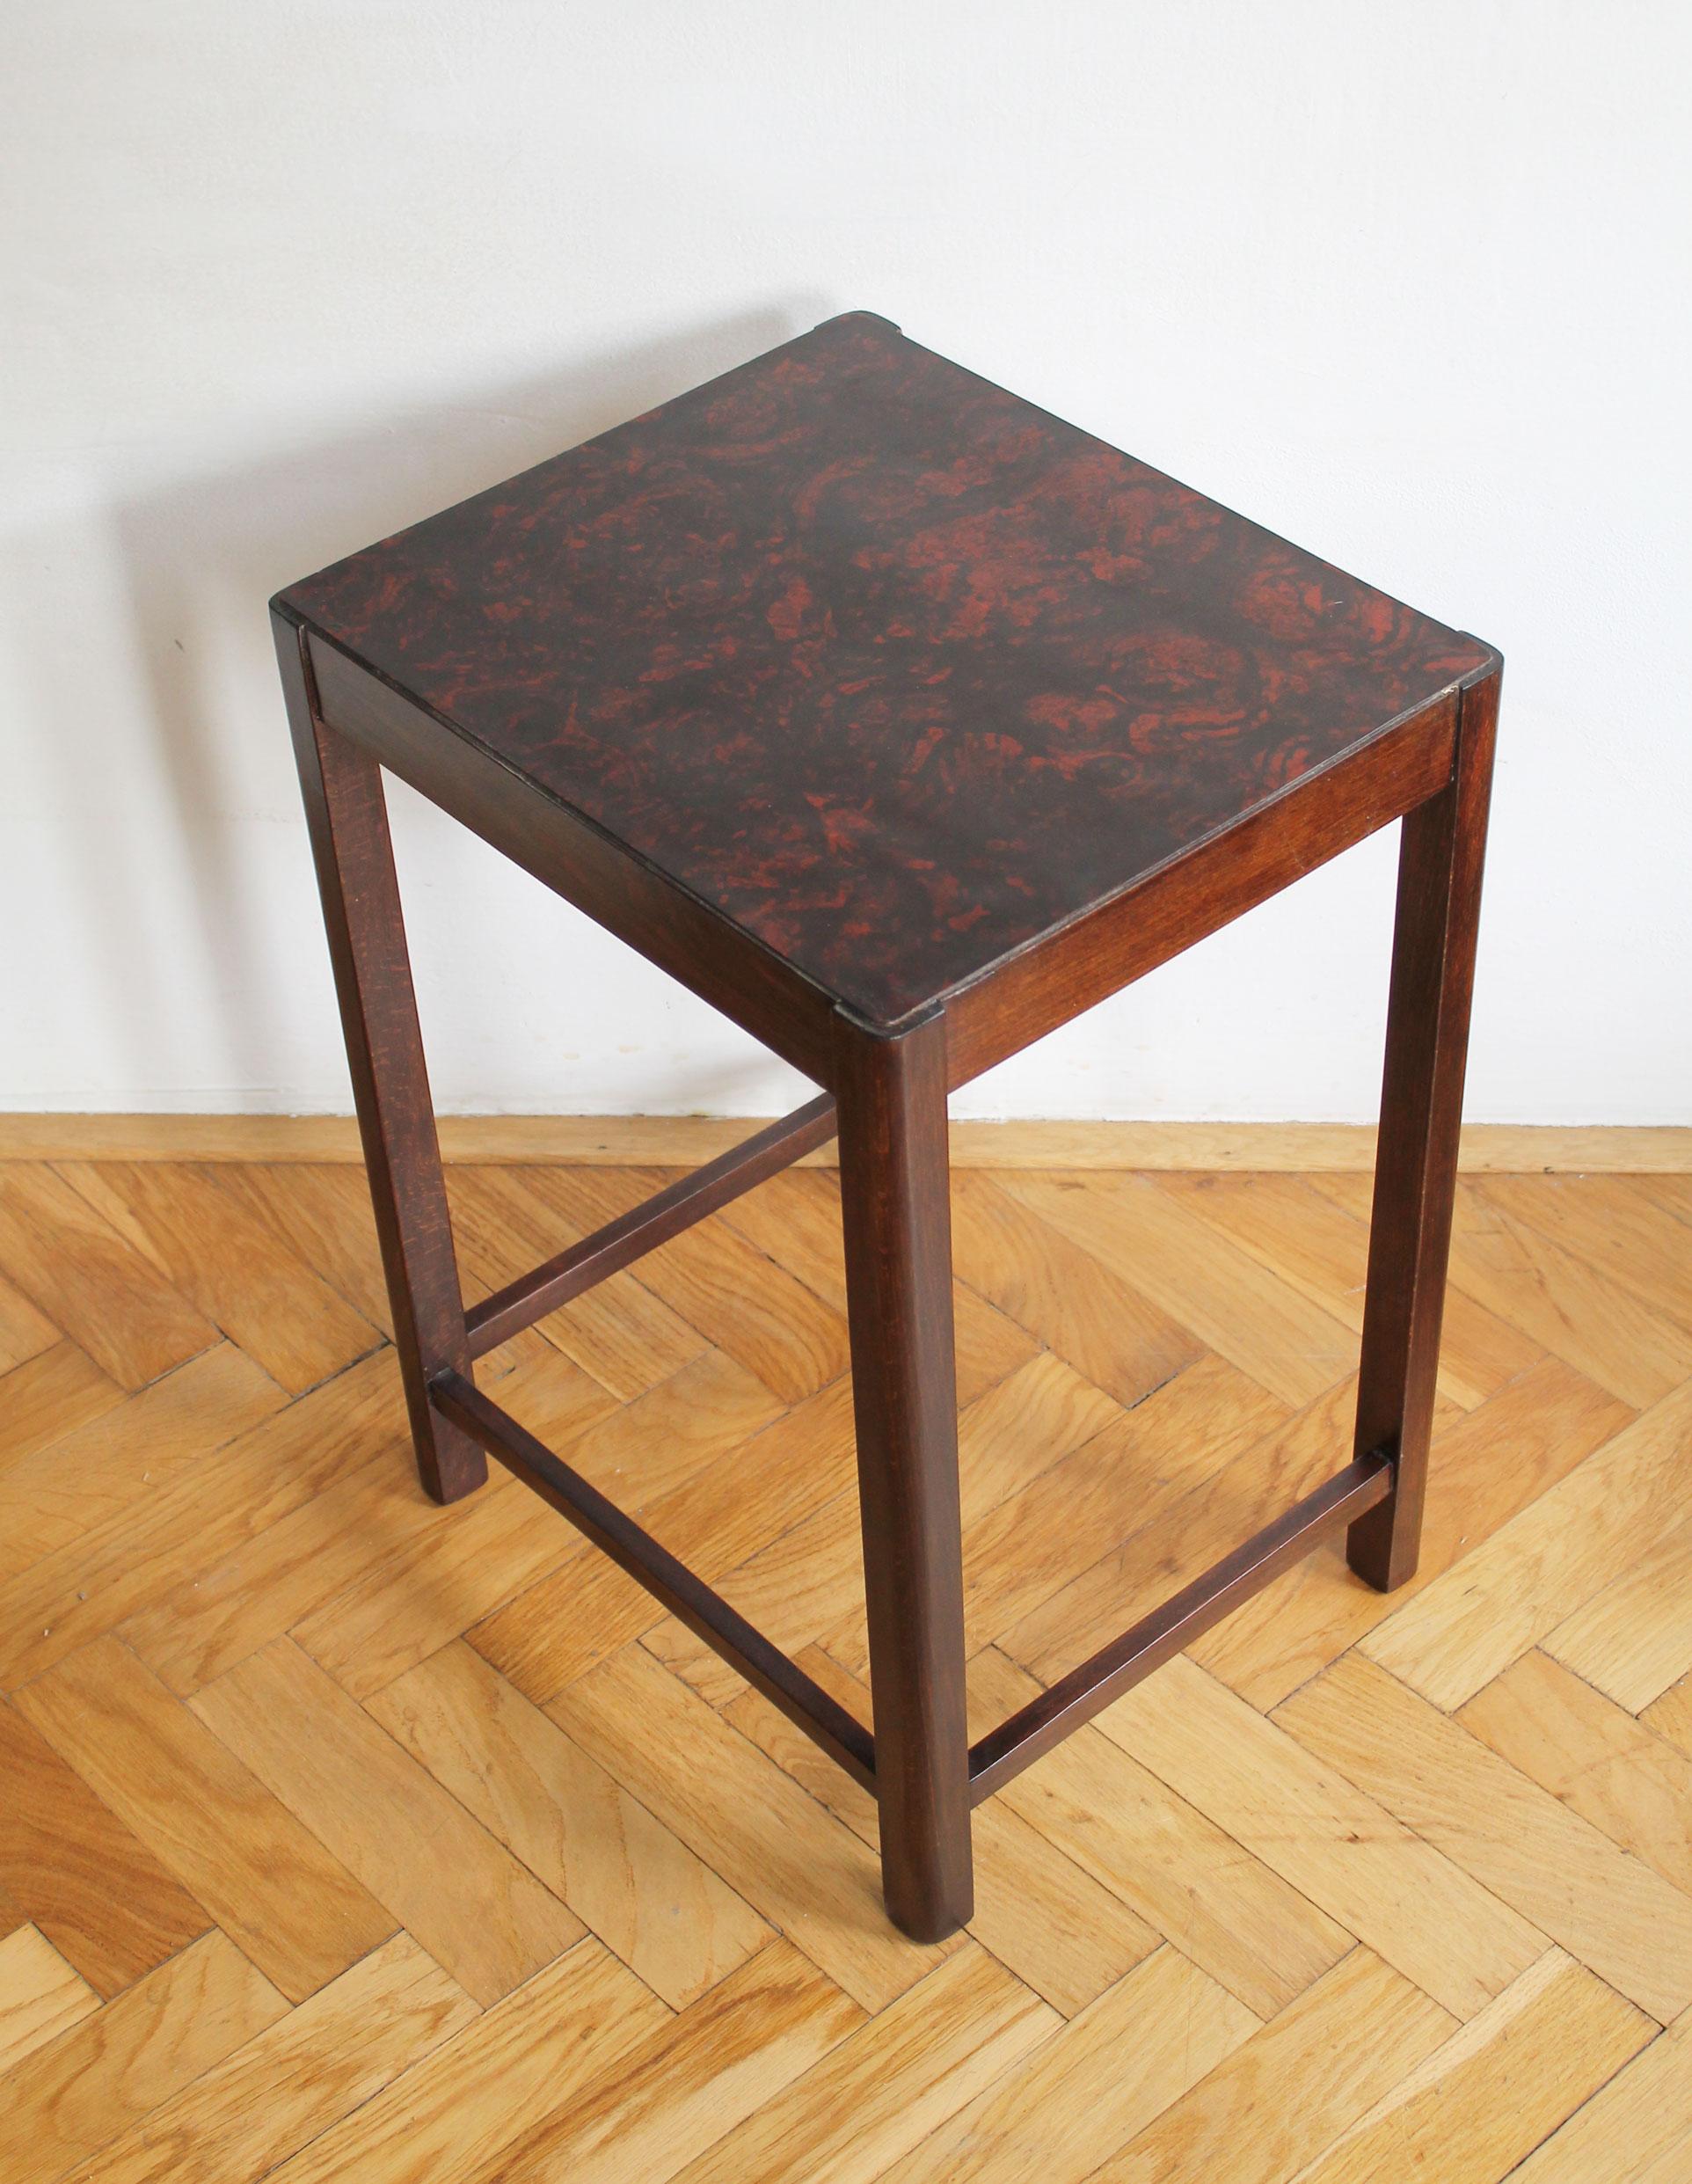 A rare side table designed by Thonet and produced in the company's factory in former Czechoslovakia.

This piece was produced in the 1930’s and it is evident in the design that there is a shift towards purist modernist aesthetics. There is no